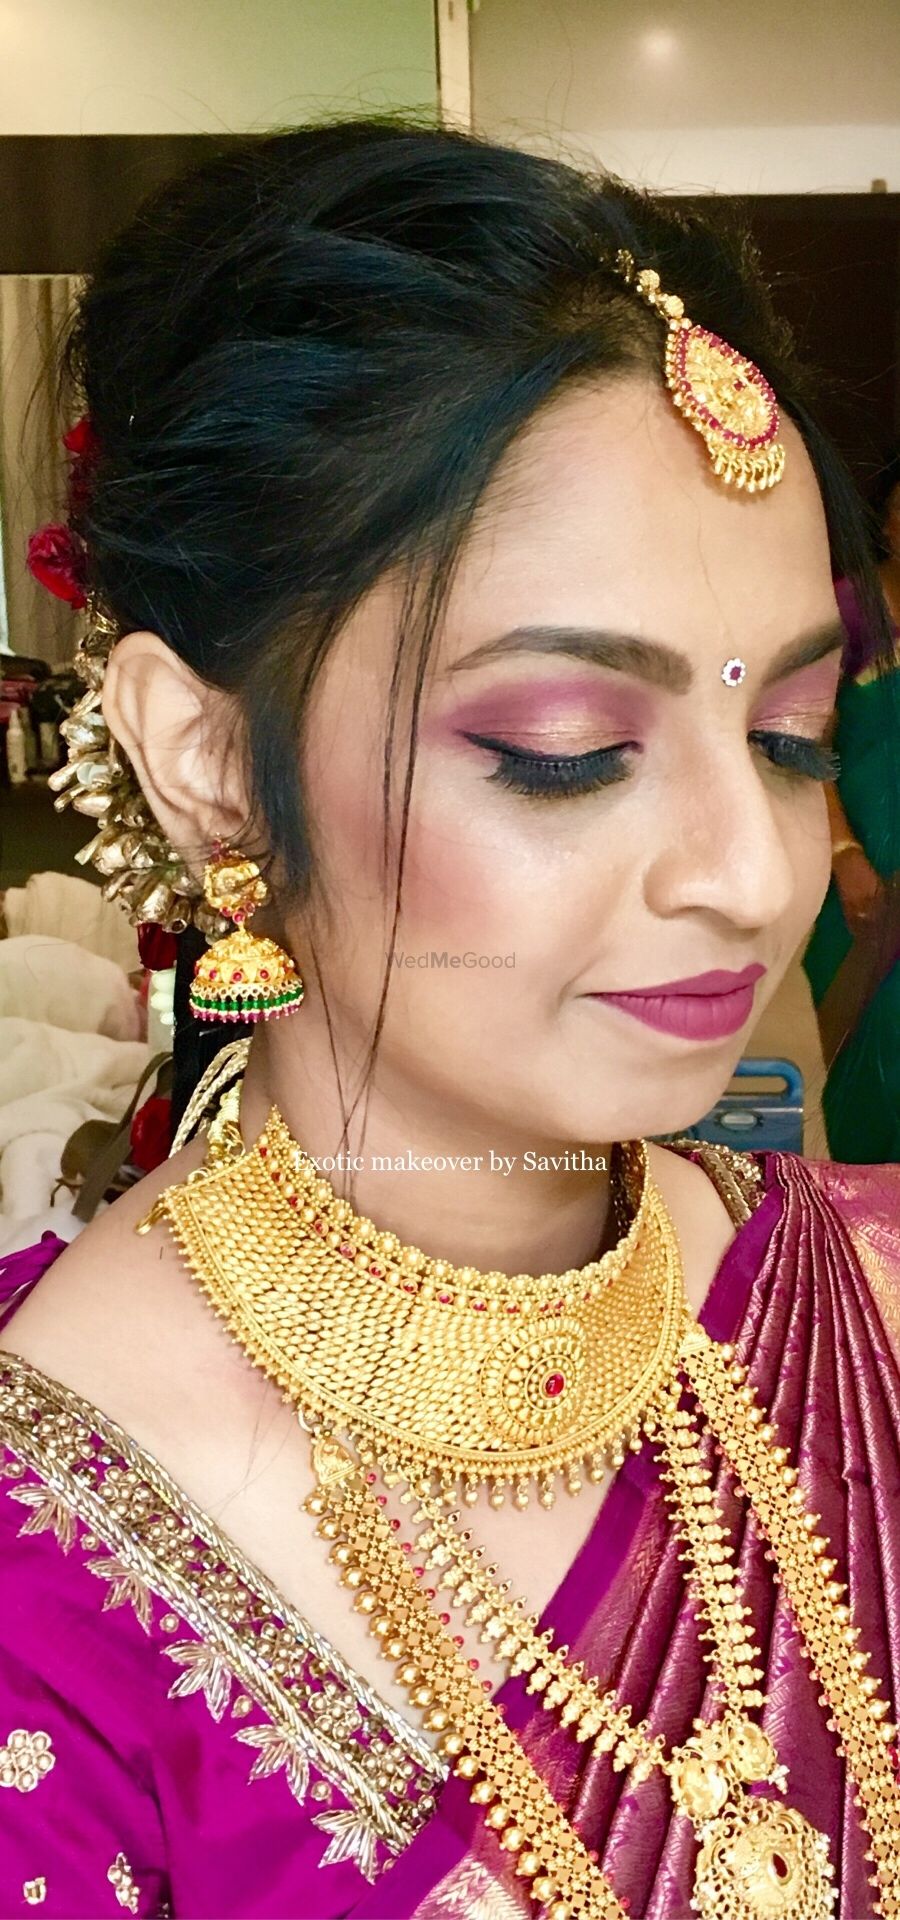 Photo From Brides-2020 - By Exotic makeover by Savitha 